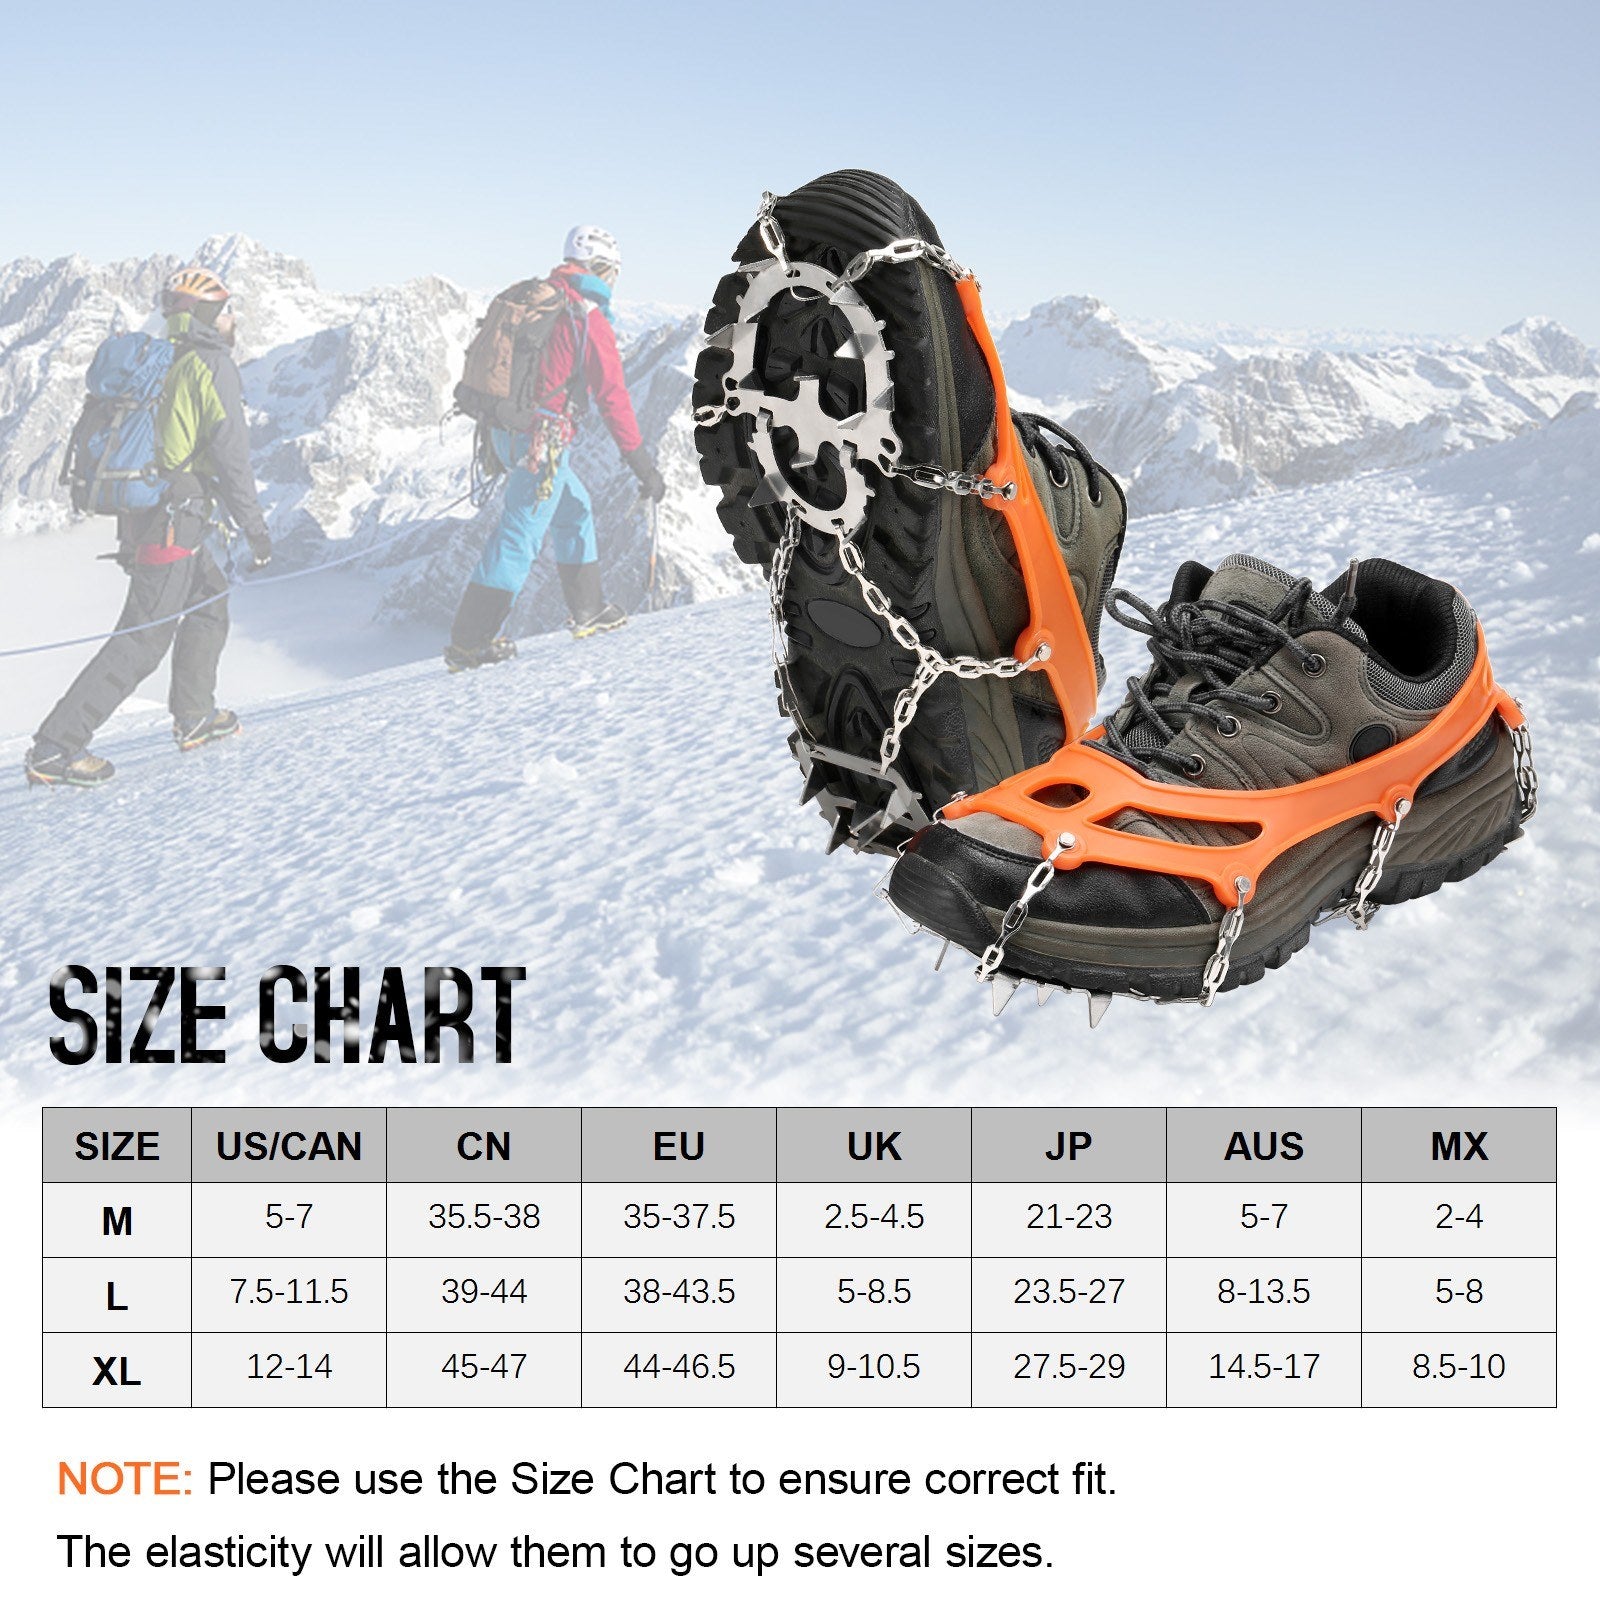 18 Spikes Traction Cleats Women Men Anti-slip Ice Snow Grips with Storage Pouch for Walking Hiking Fishing Mountaineering